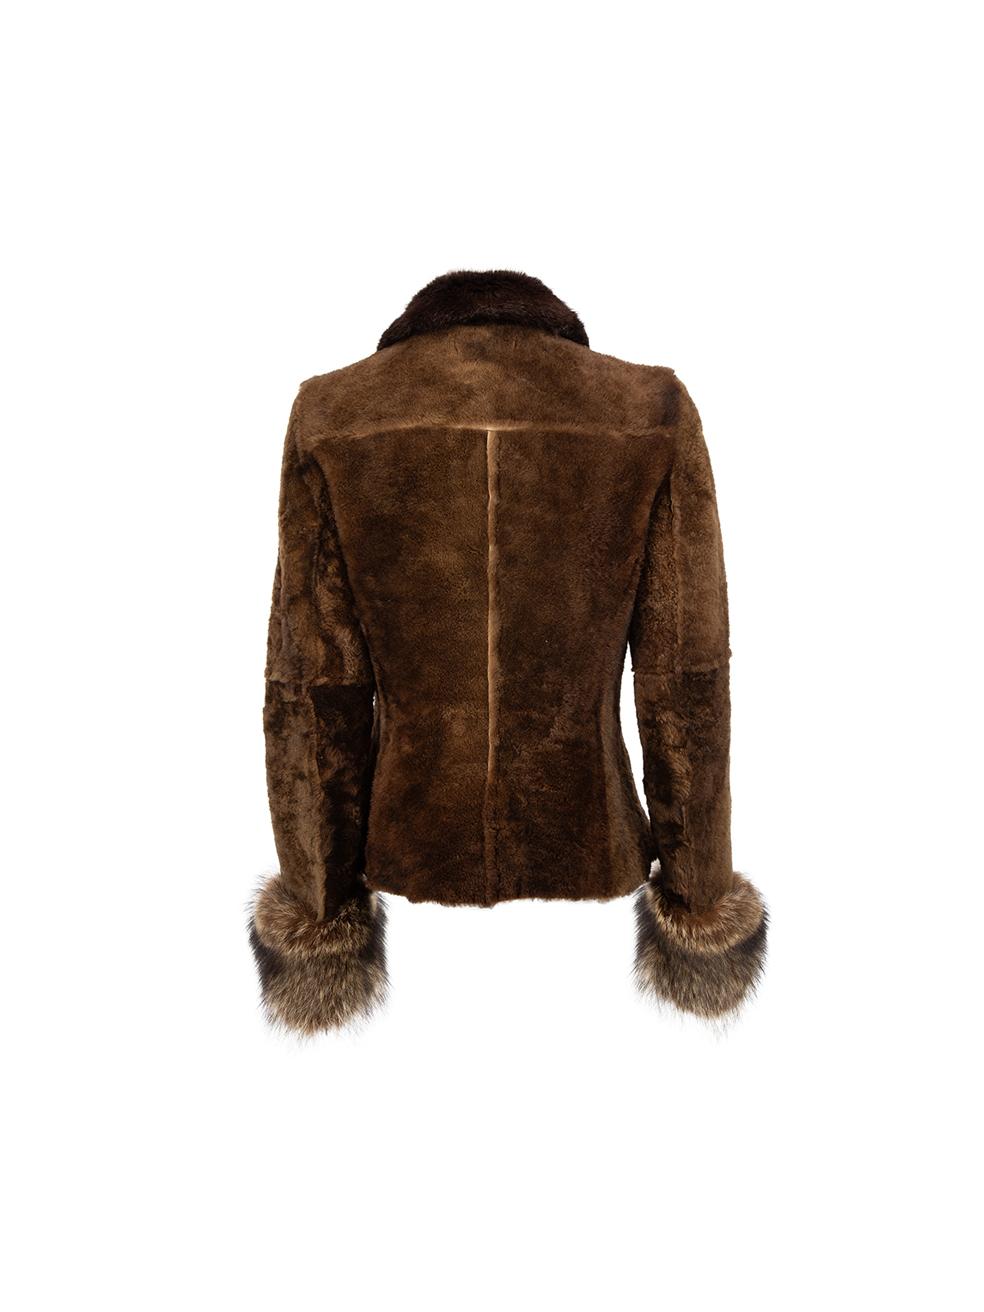 Vintage Brown Lamb Fur & Leather Jacket Size L In Good Condition For Sale In London, GB